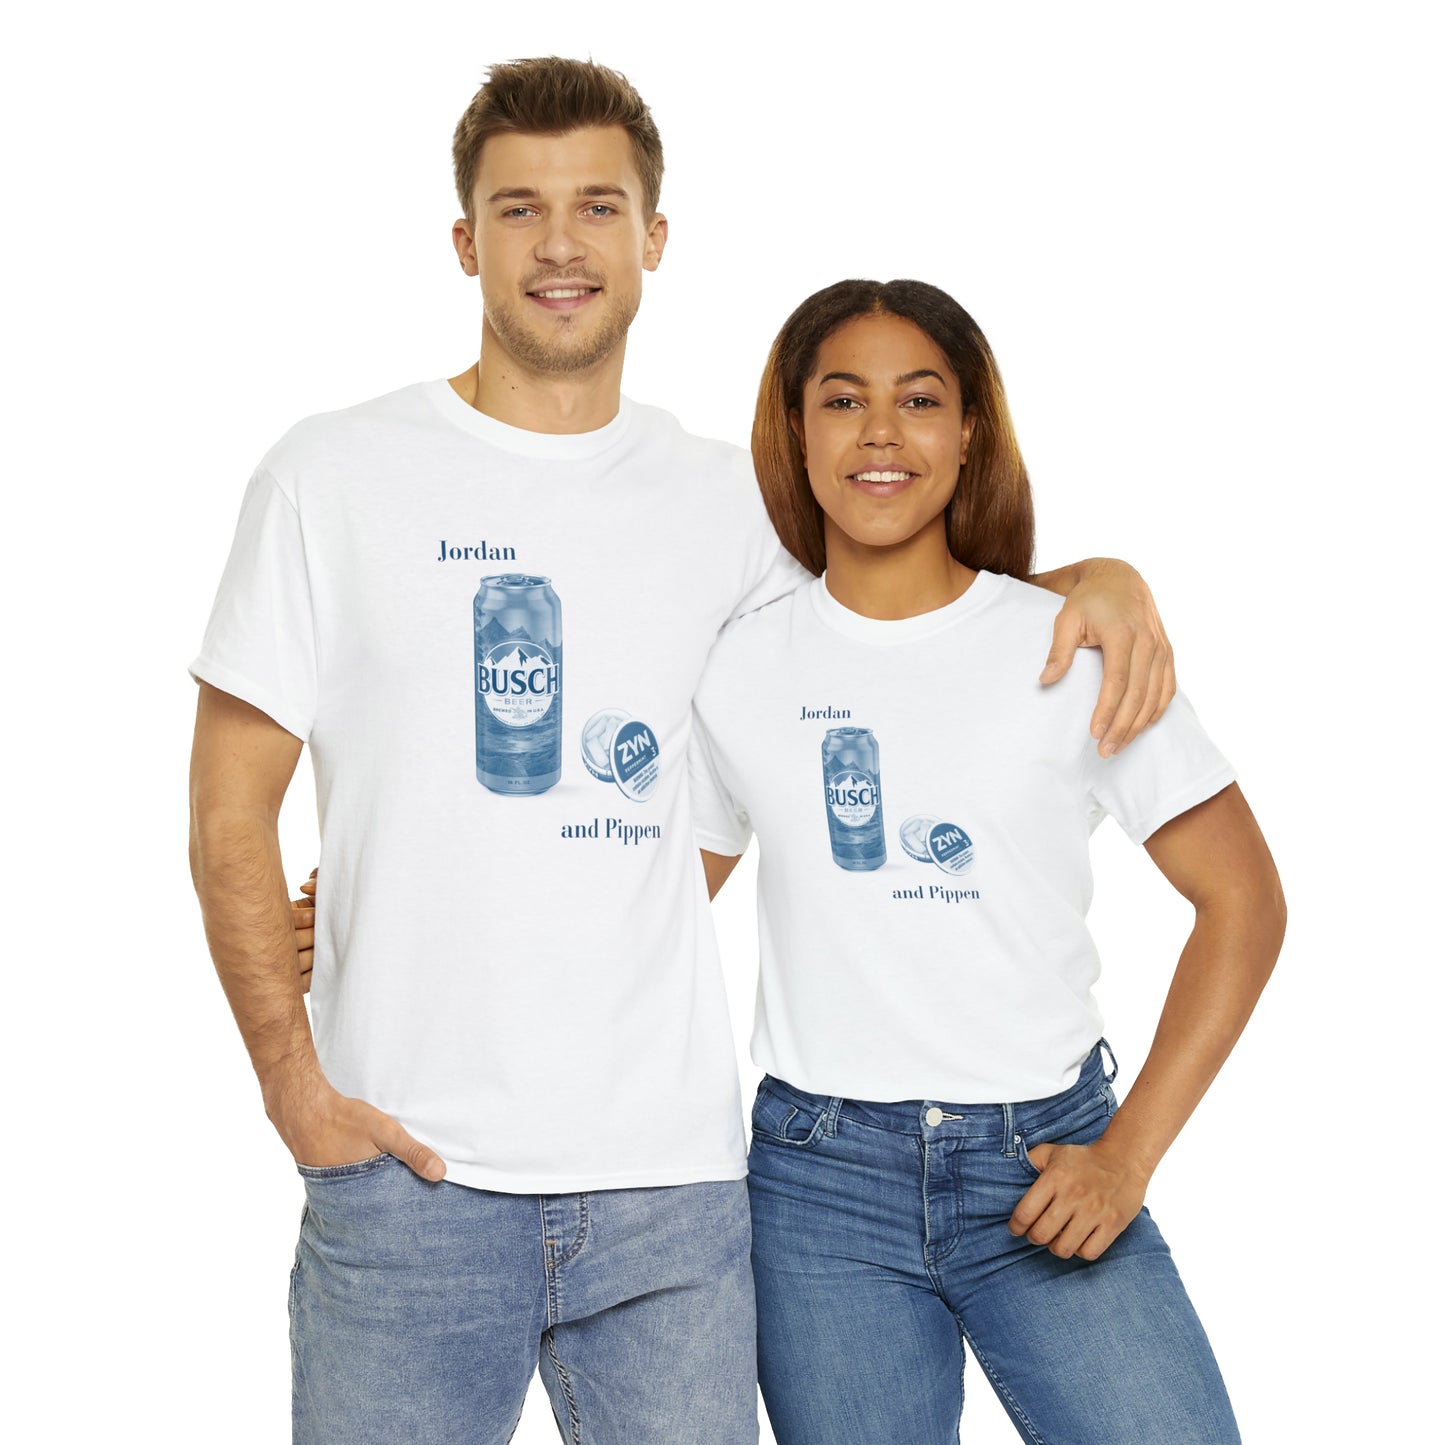 Jordan and Pippen Busch and Zyns - Unisex Heavy Cotton Tee